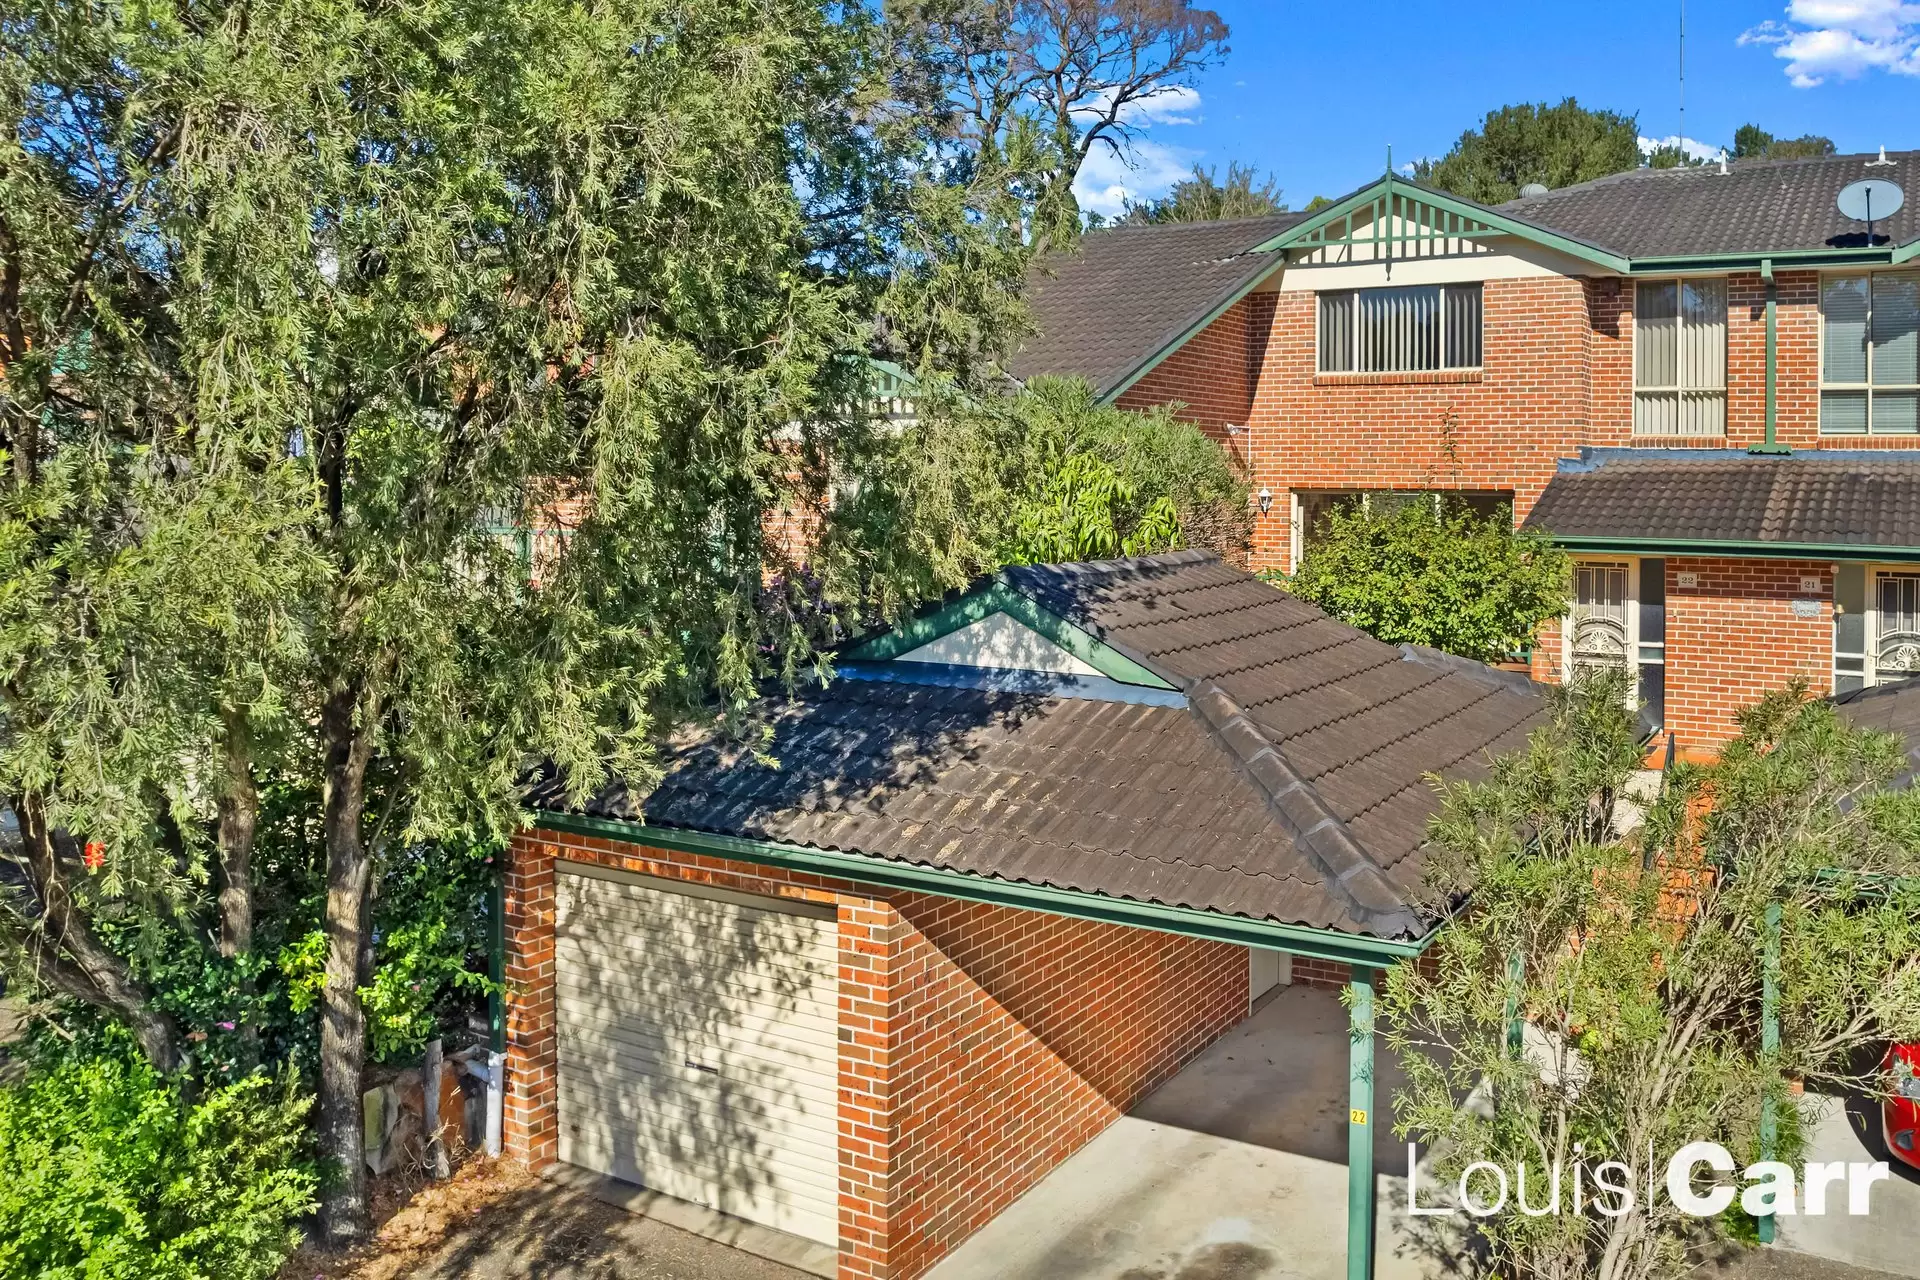 22/221A North Rocks Road, North Rocks Leased by Louis Carr Real Estate - image 1